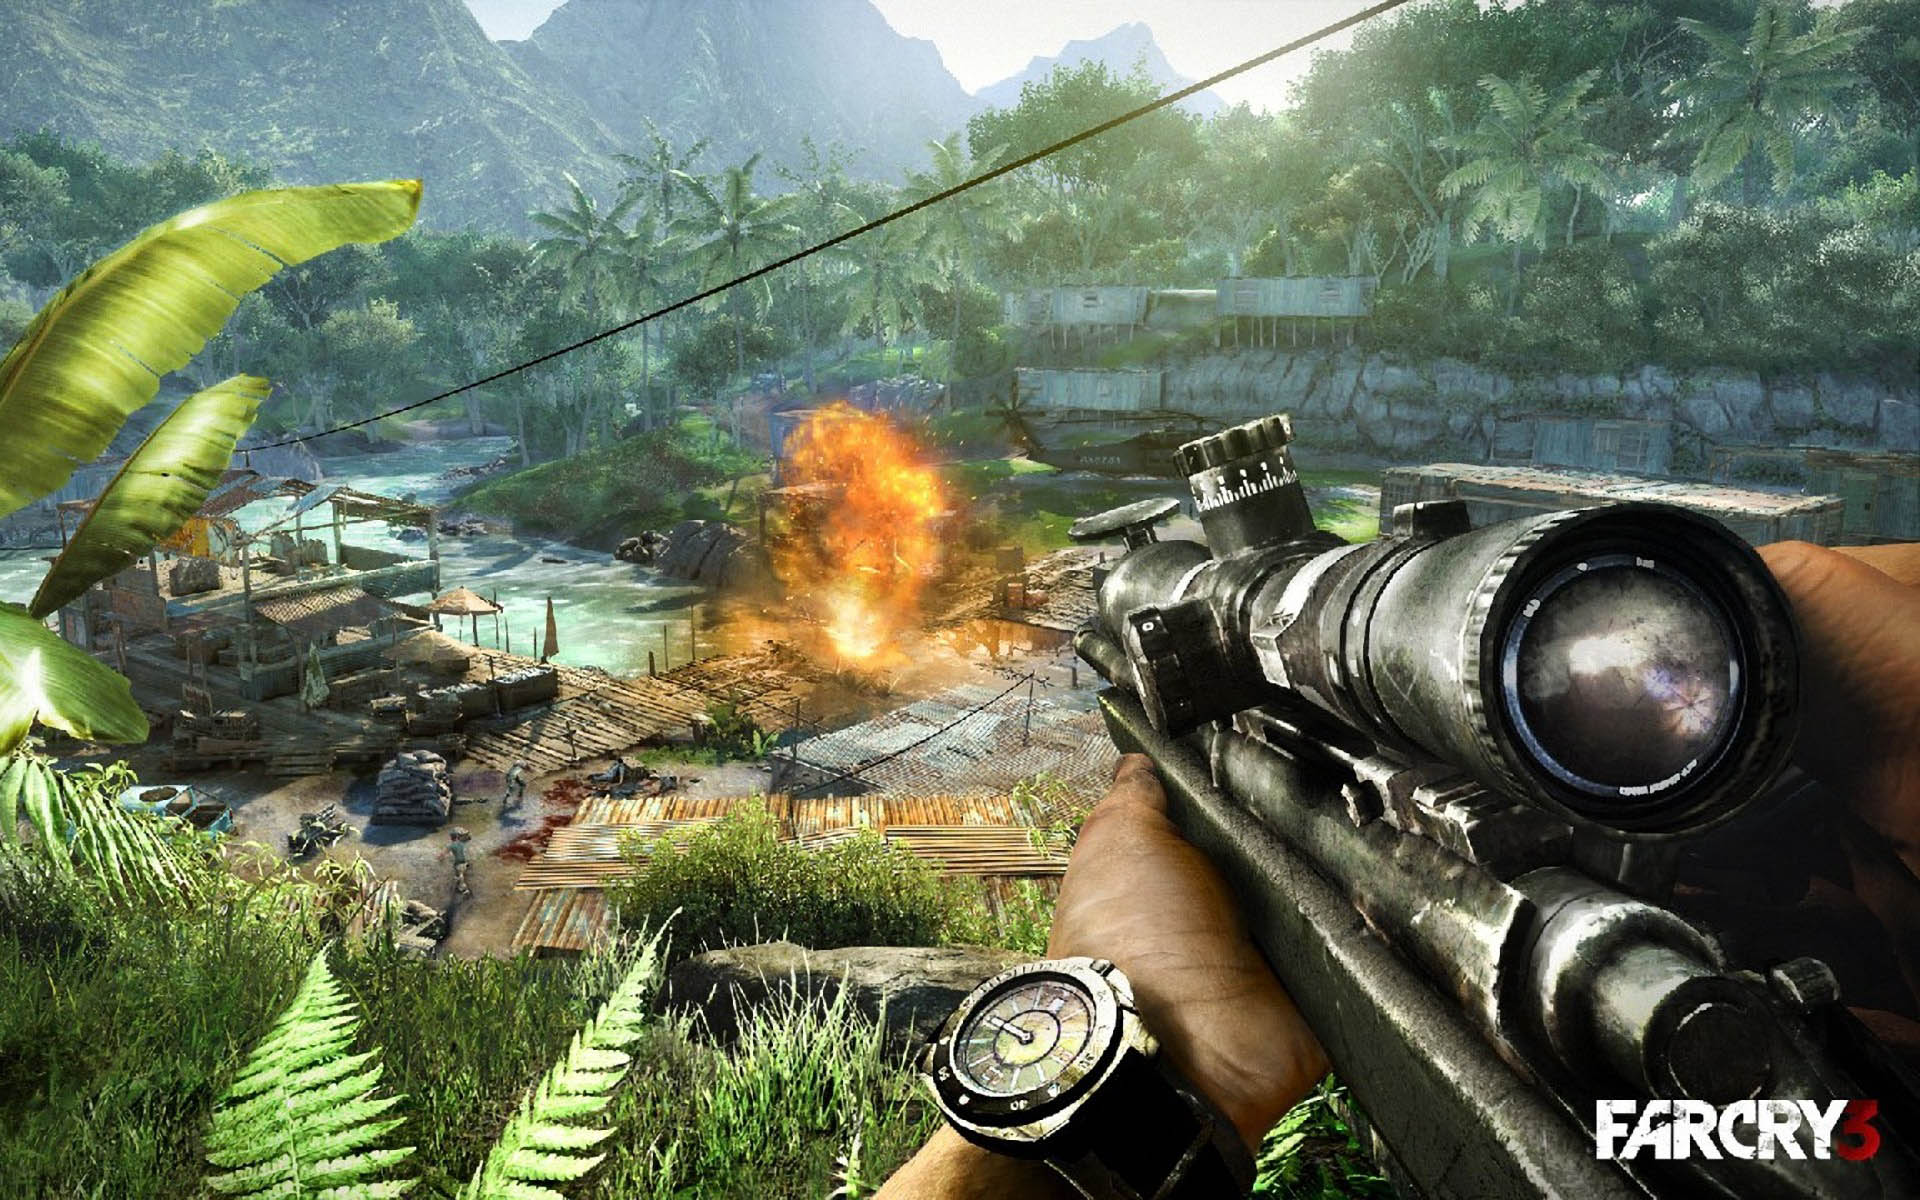 far cry 3 wallpapers wallpapers55com   Best Wallpapers for PCs 1920x1200